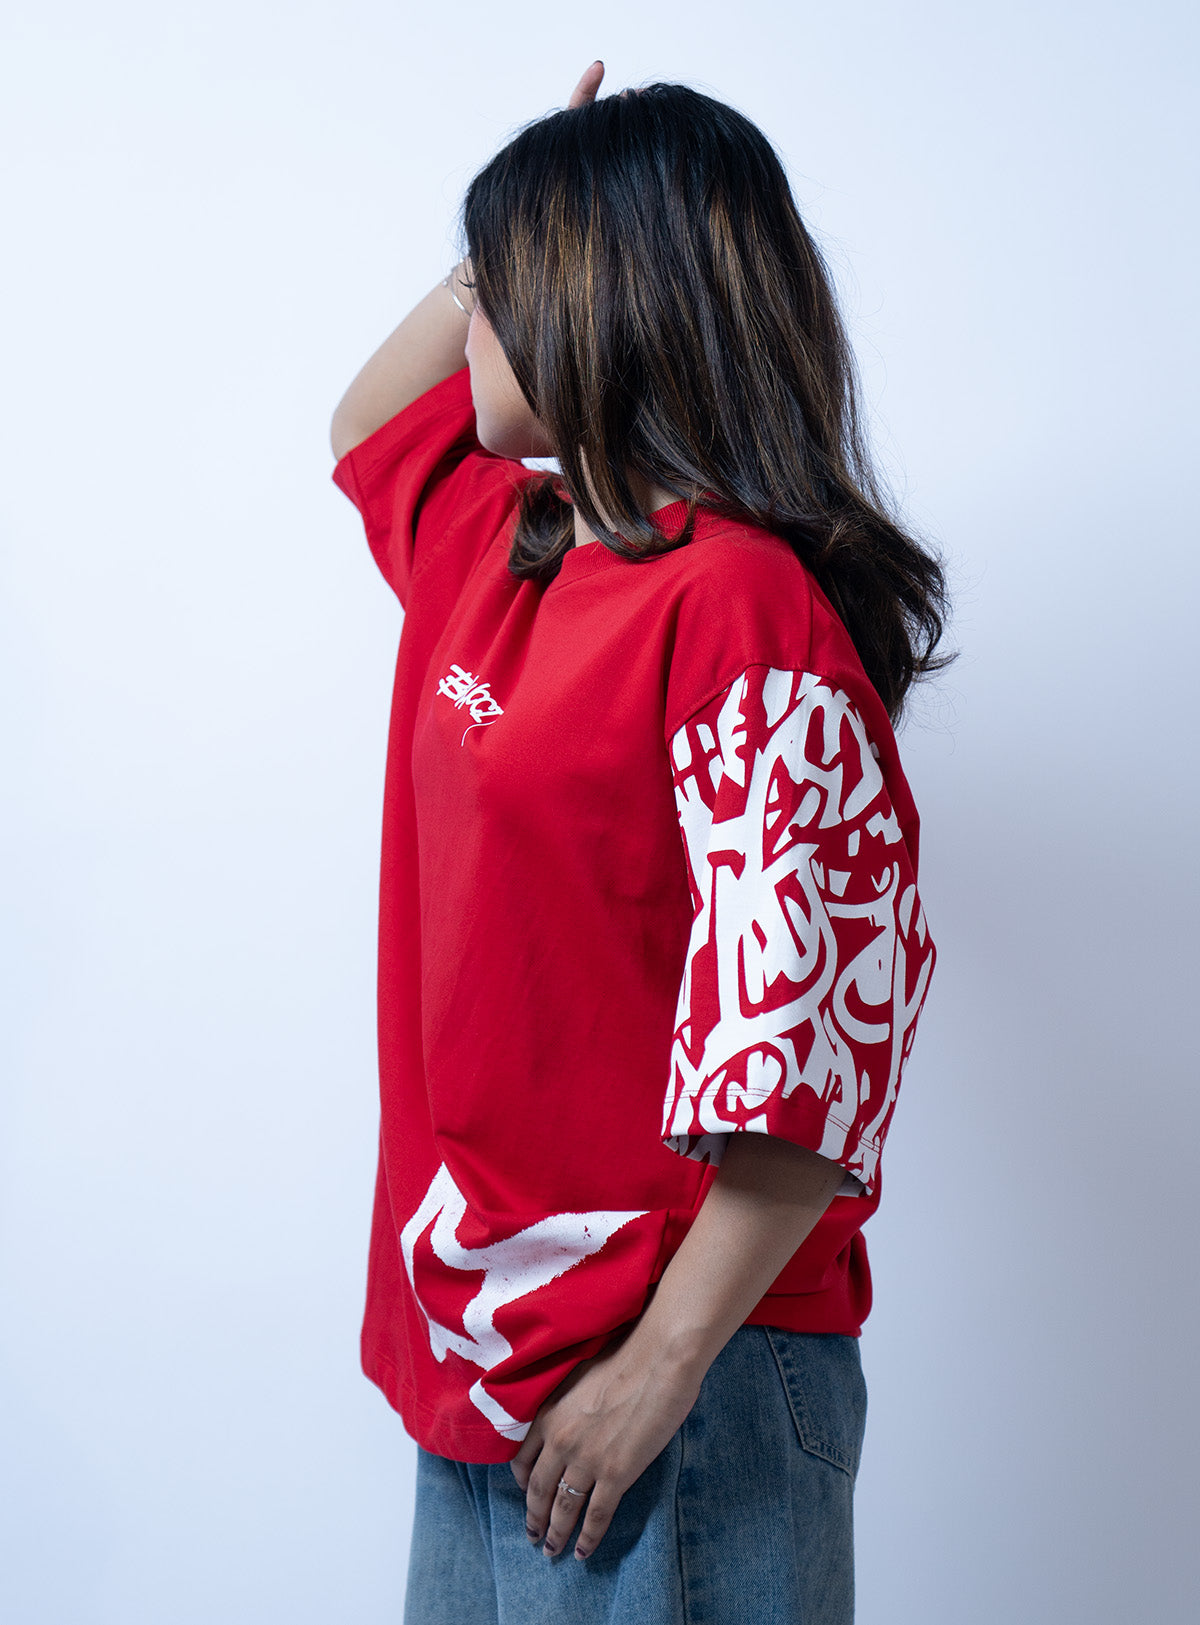 Side view image of a girl wearing red graffi tee from a street wear brand called Ballucci.